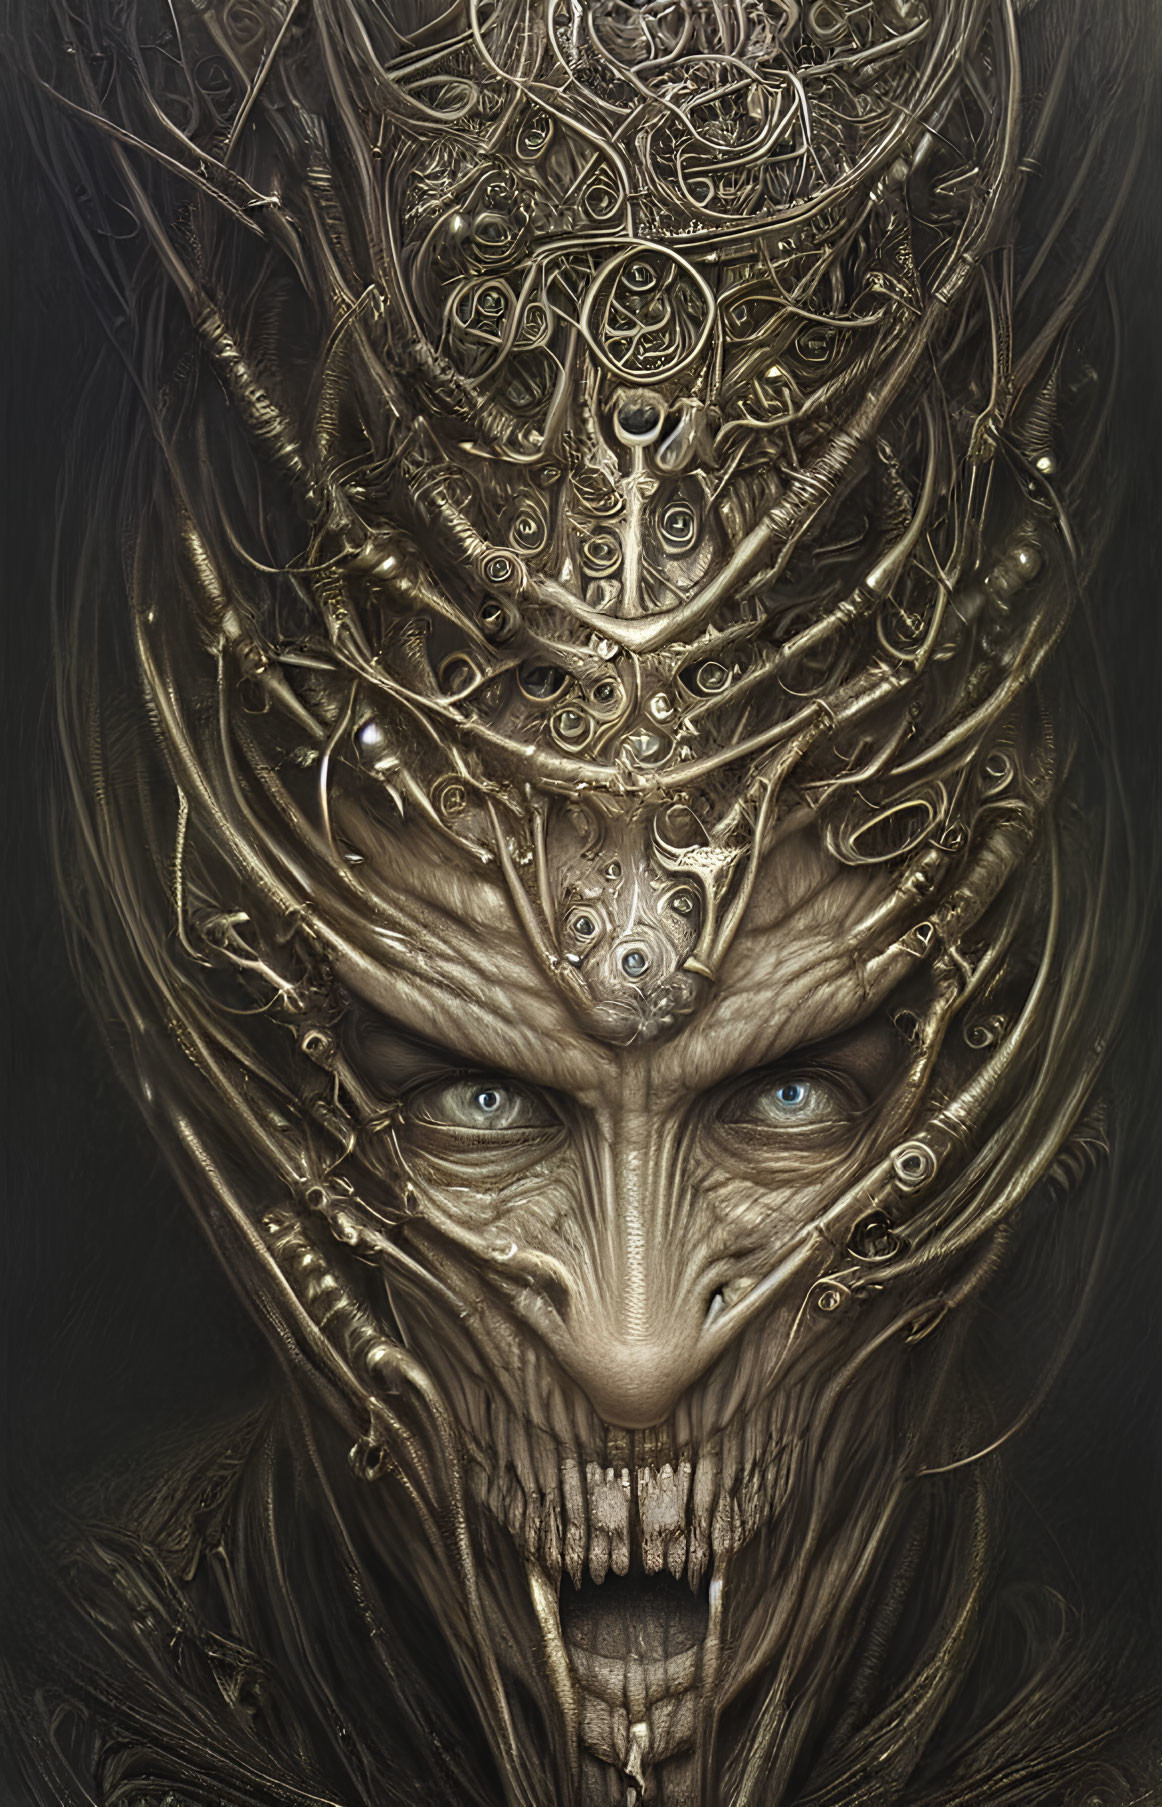 Detailed humanoid creature with regal golden headpiece and blue eyes